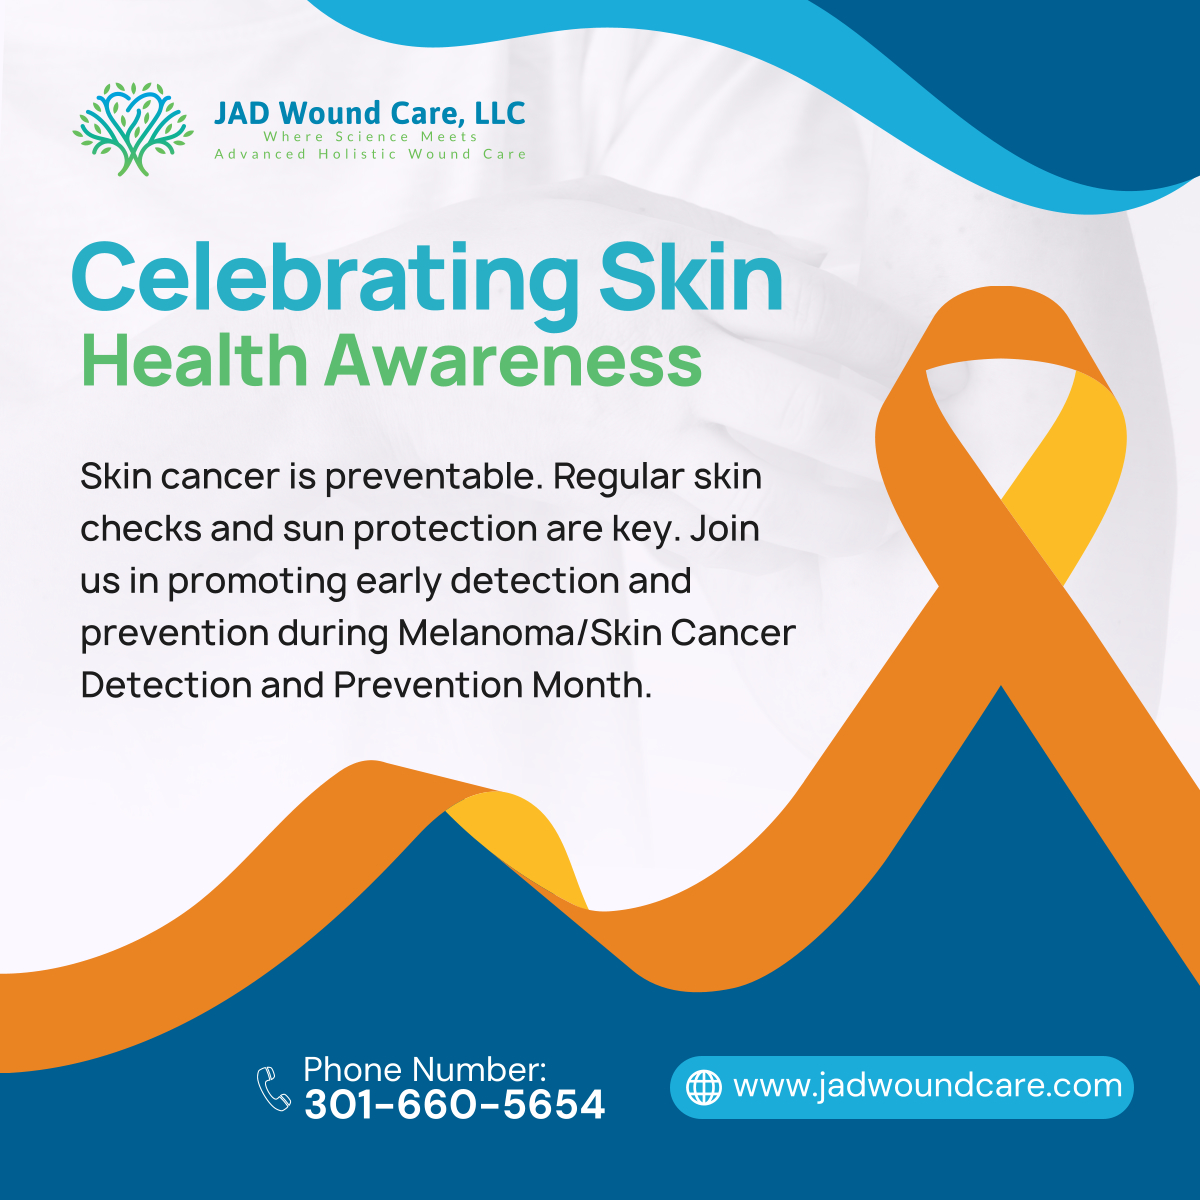 Protect your skin and spread awareness about melanoma and skin cancer prevention. Together, we can make a difference in reducing skin cancer rates. 

#SkinHealth #SunSafety #SkinCancerPrevention